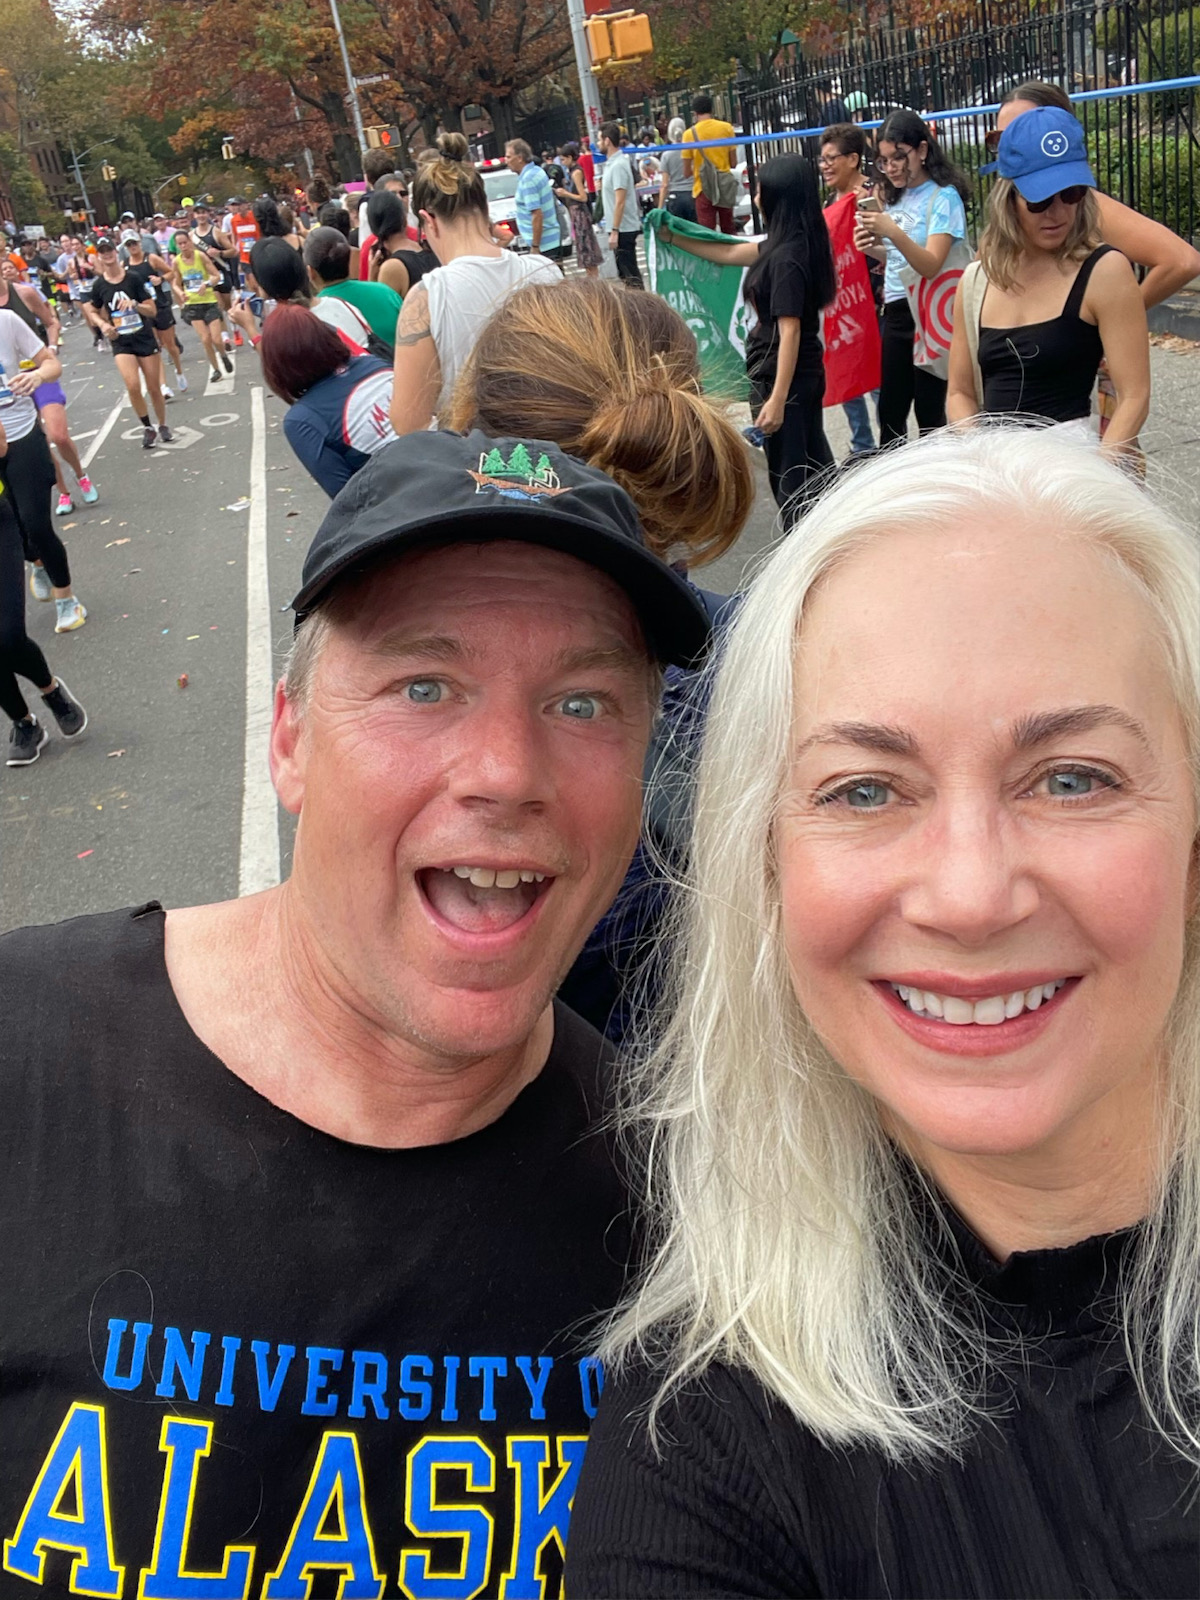 A man in a ball cap and a University of Alaska Fairbanks T-shirt, his face flushed from running, poses with a white-haired woman as marathon runners and spectators fill the background street.